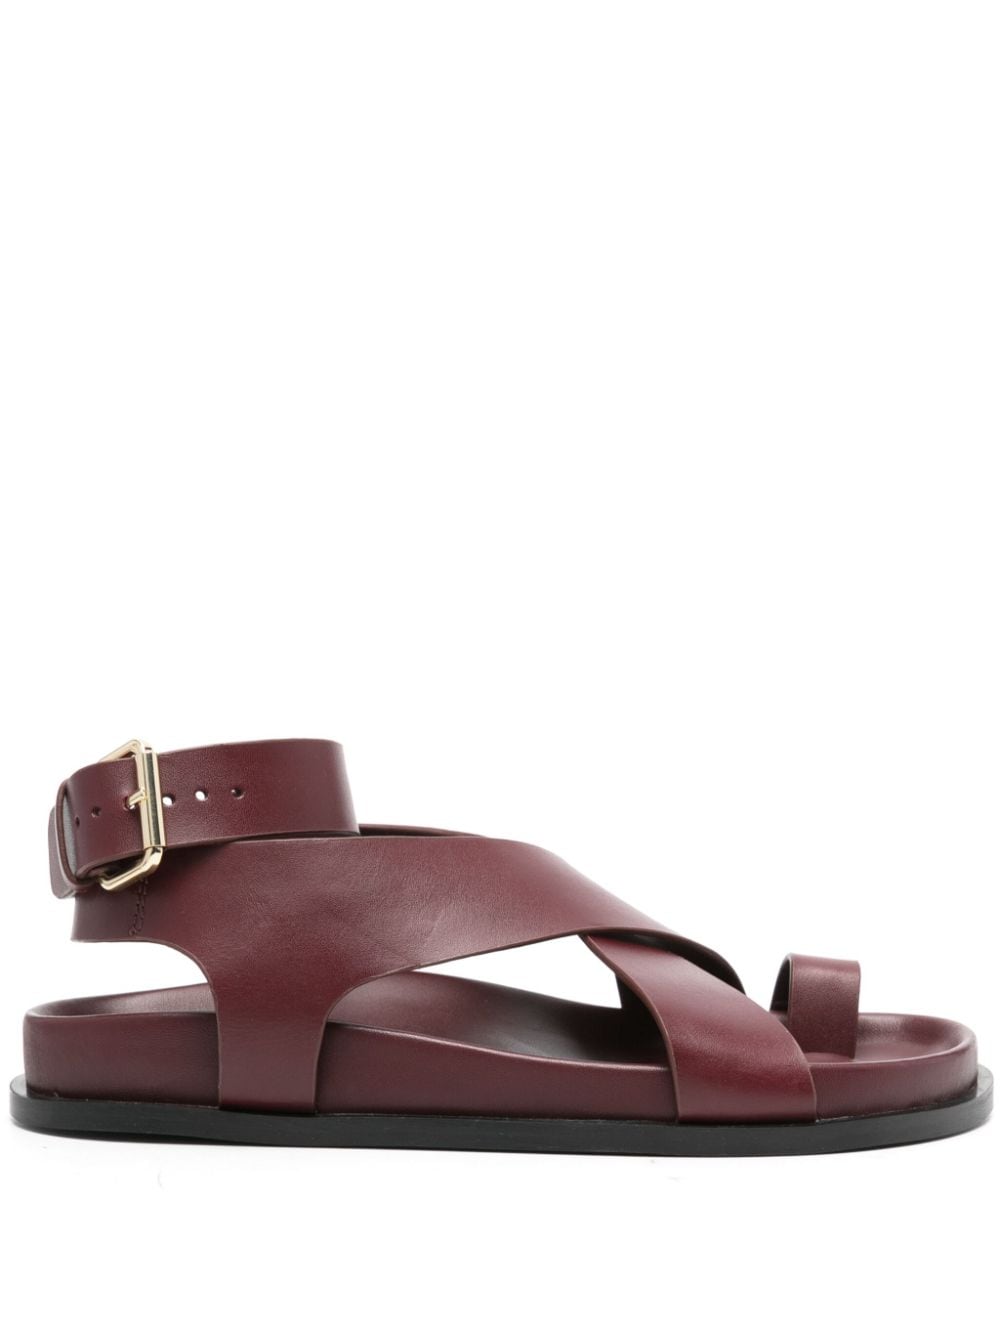 A.EMERY Jalen leather sandals - Red von A.EMERY